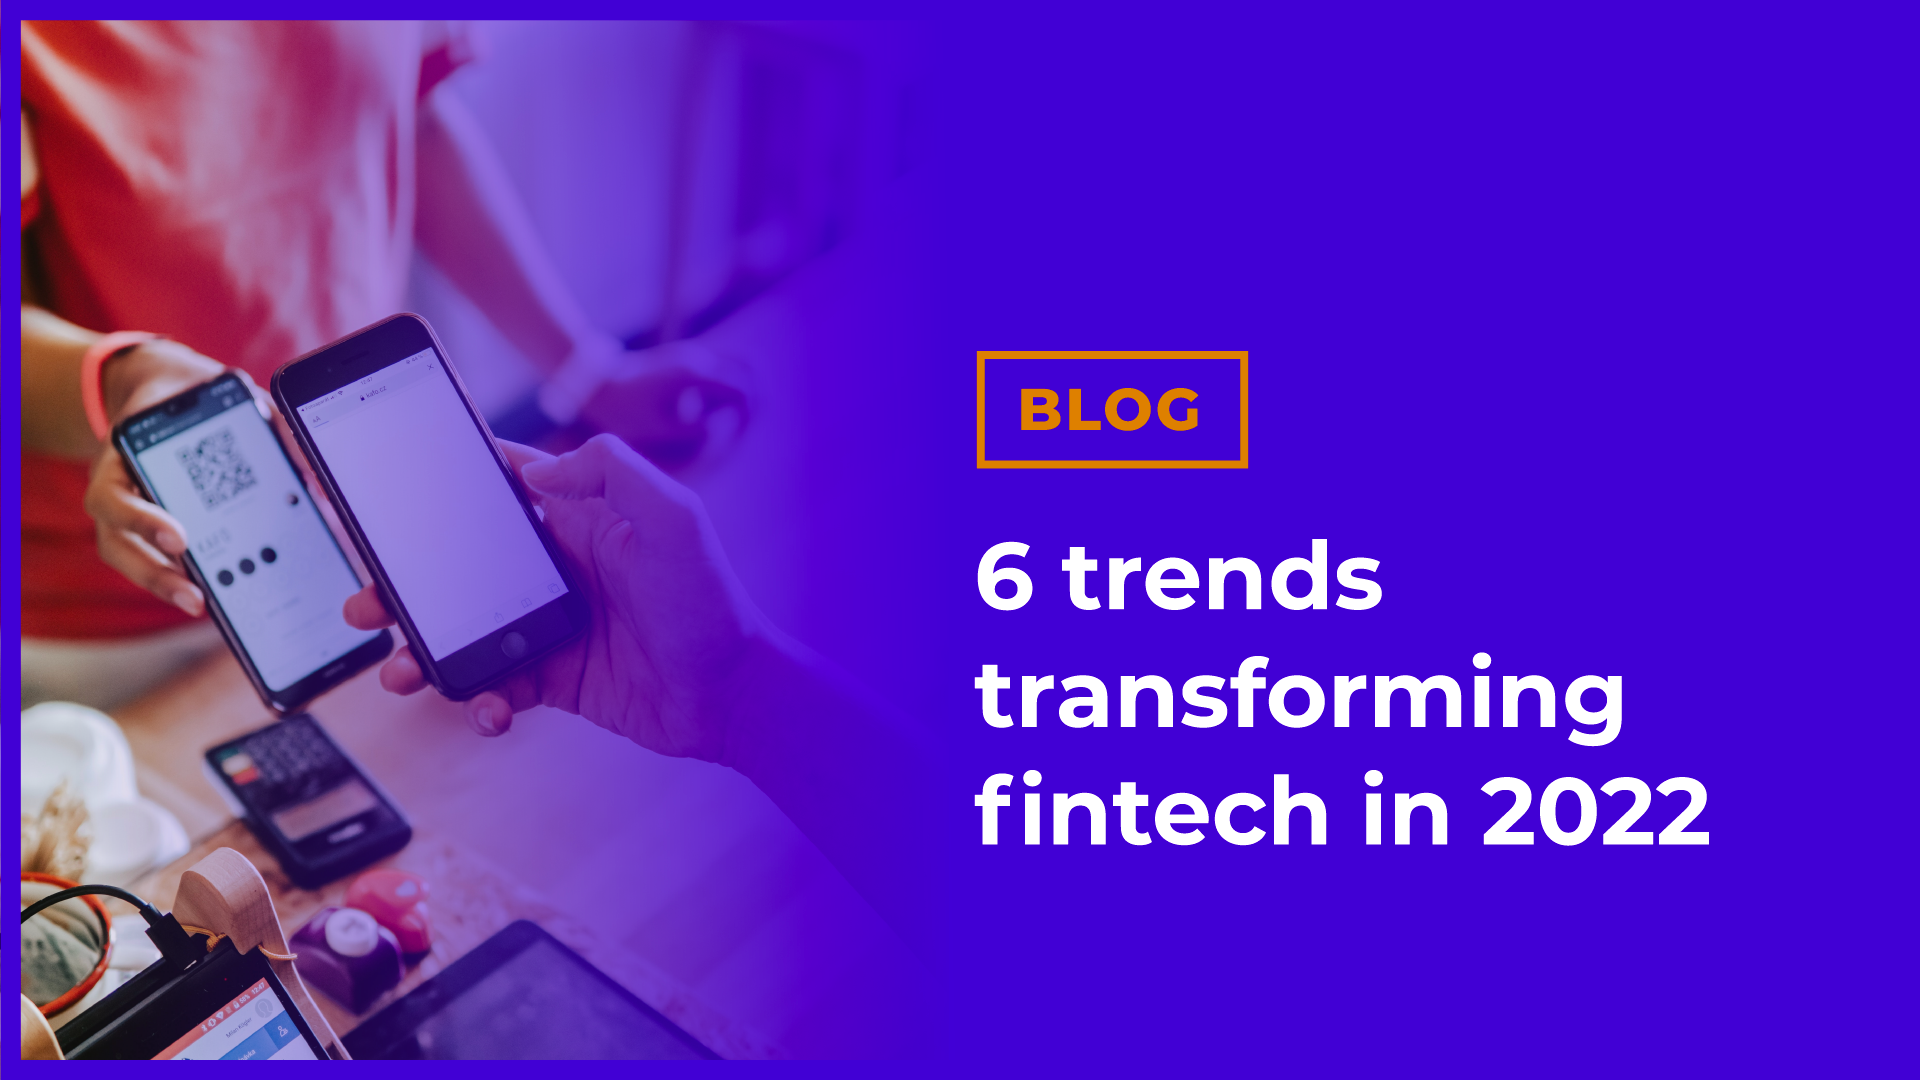 Top 6 trends transforming fintech that you need to know in 2022